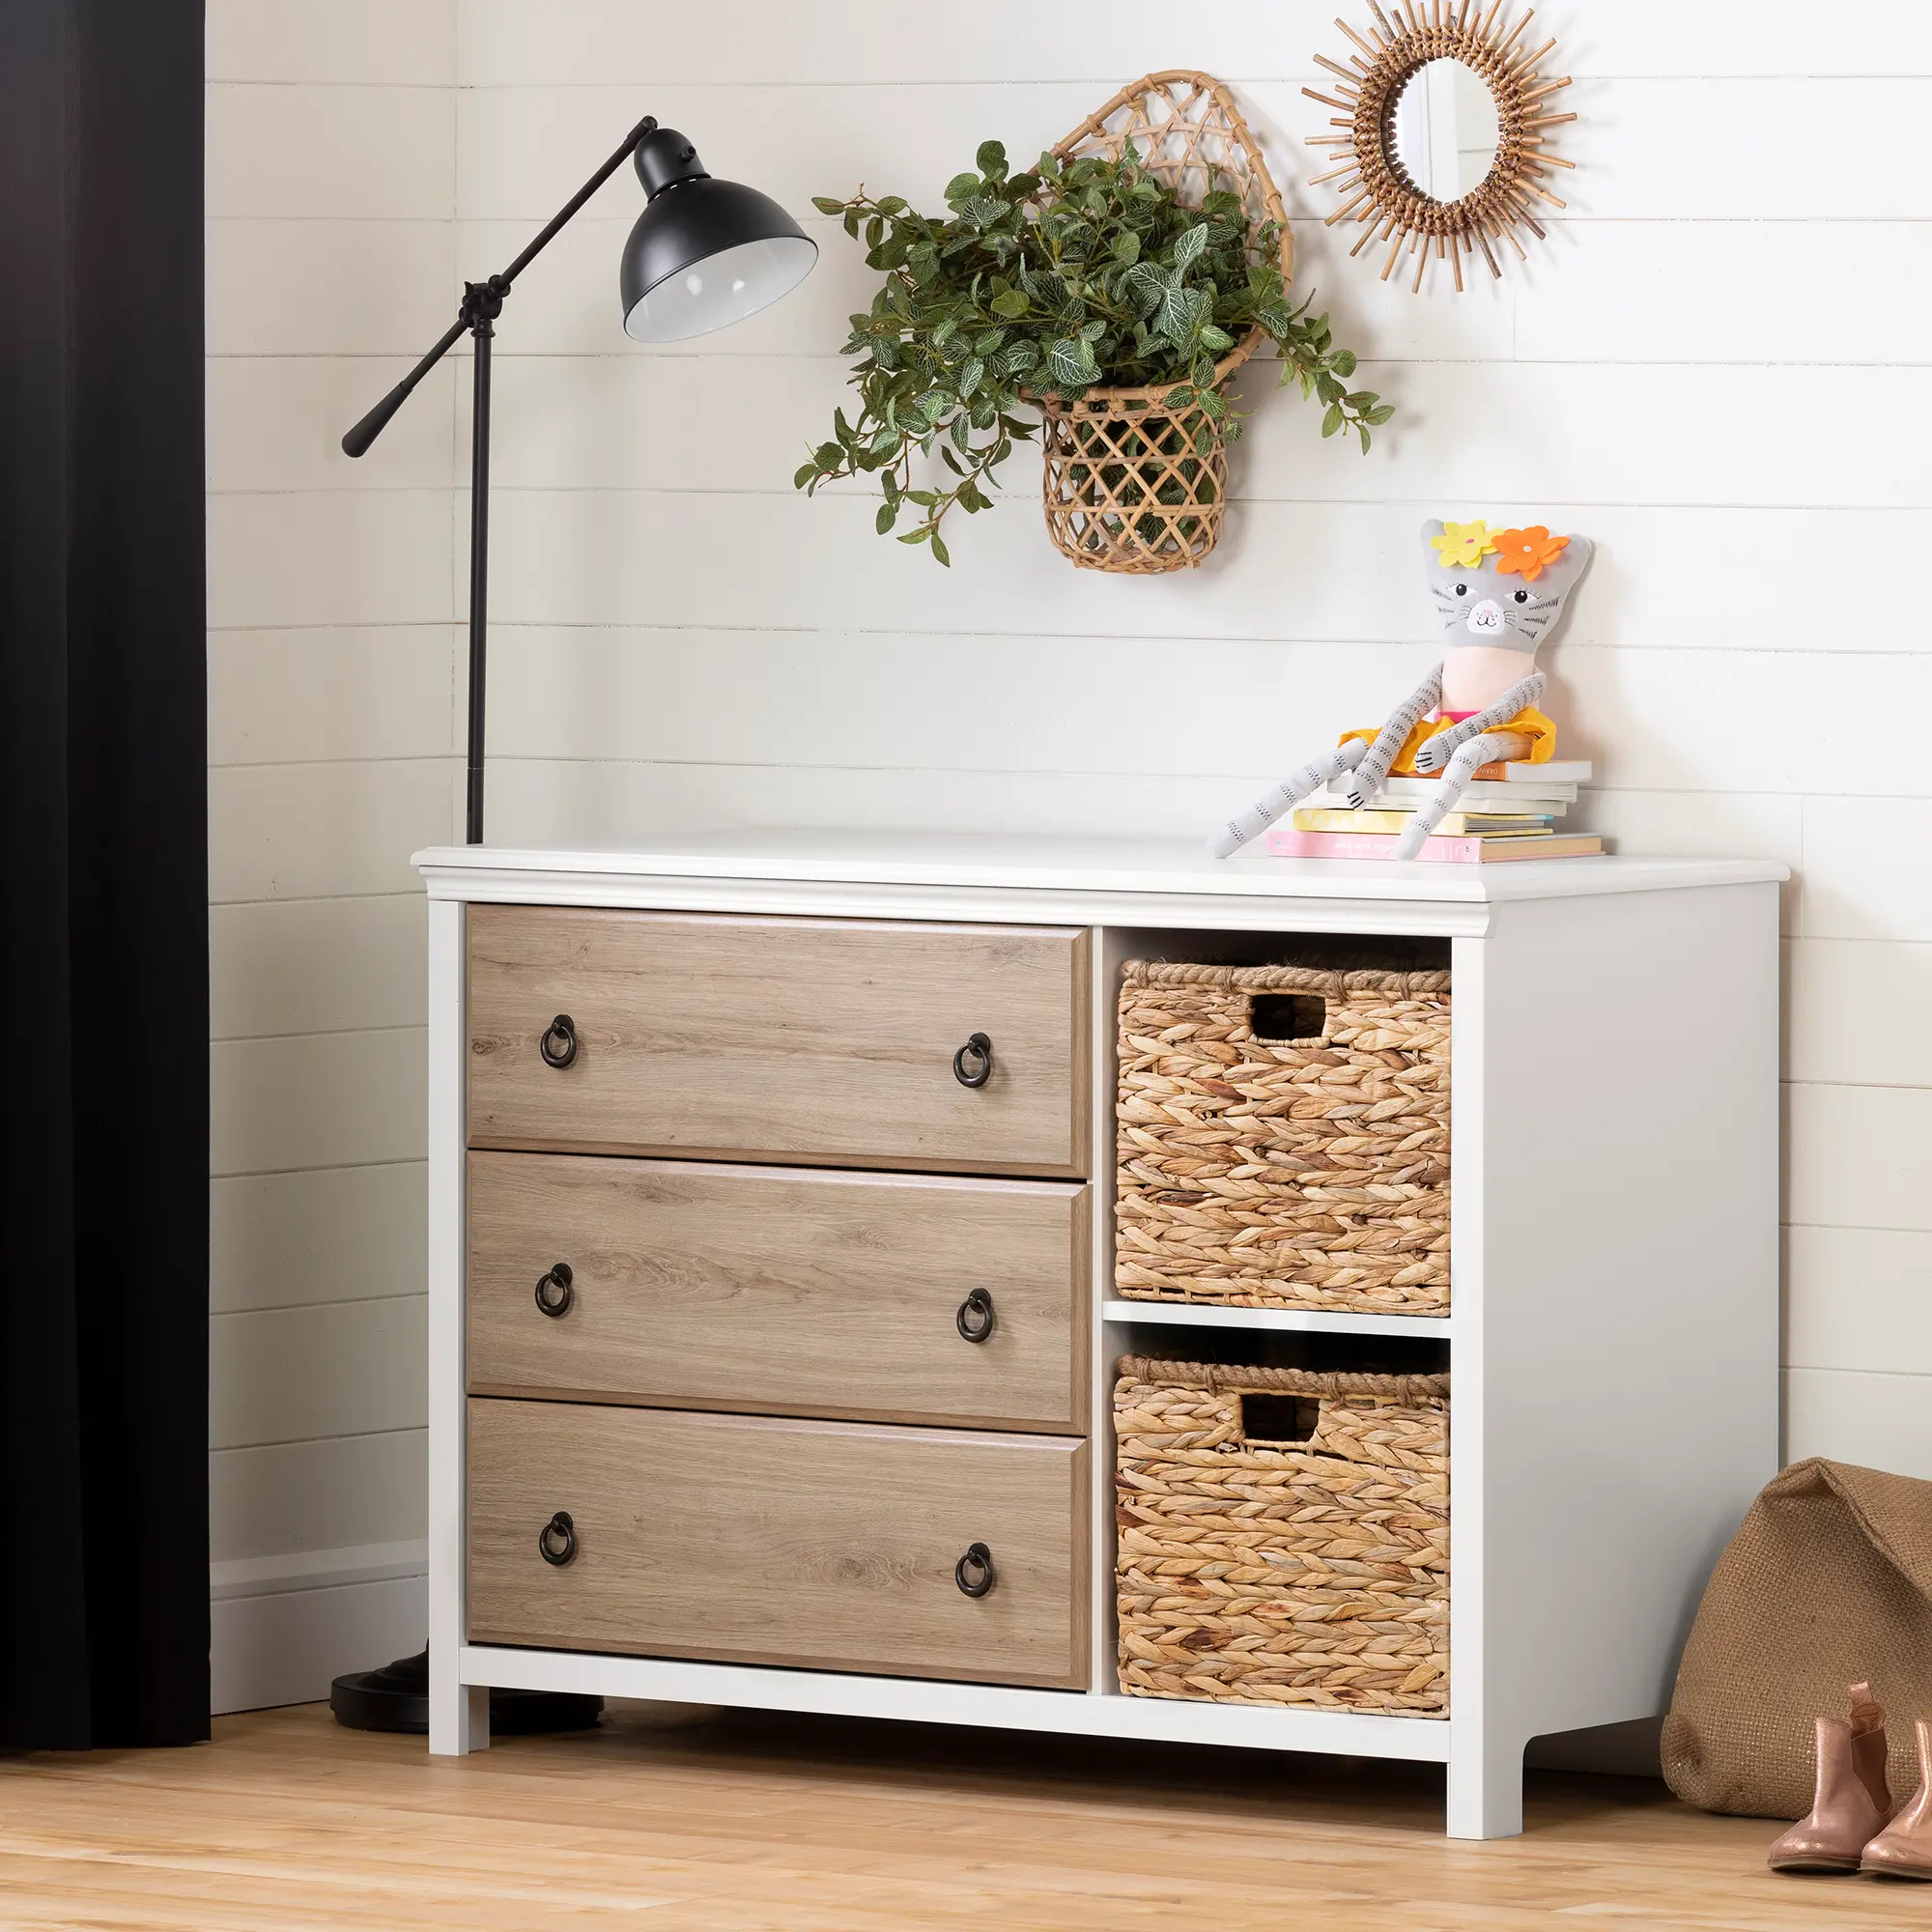 Cotton Candy Oak 3 Drawer Dresser with Baskets - South Shore